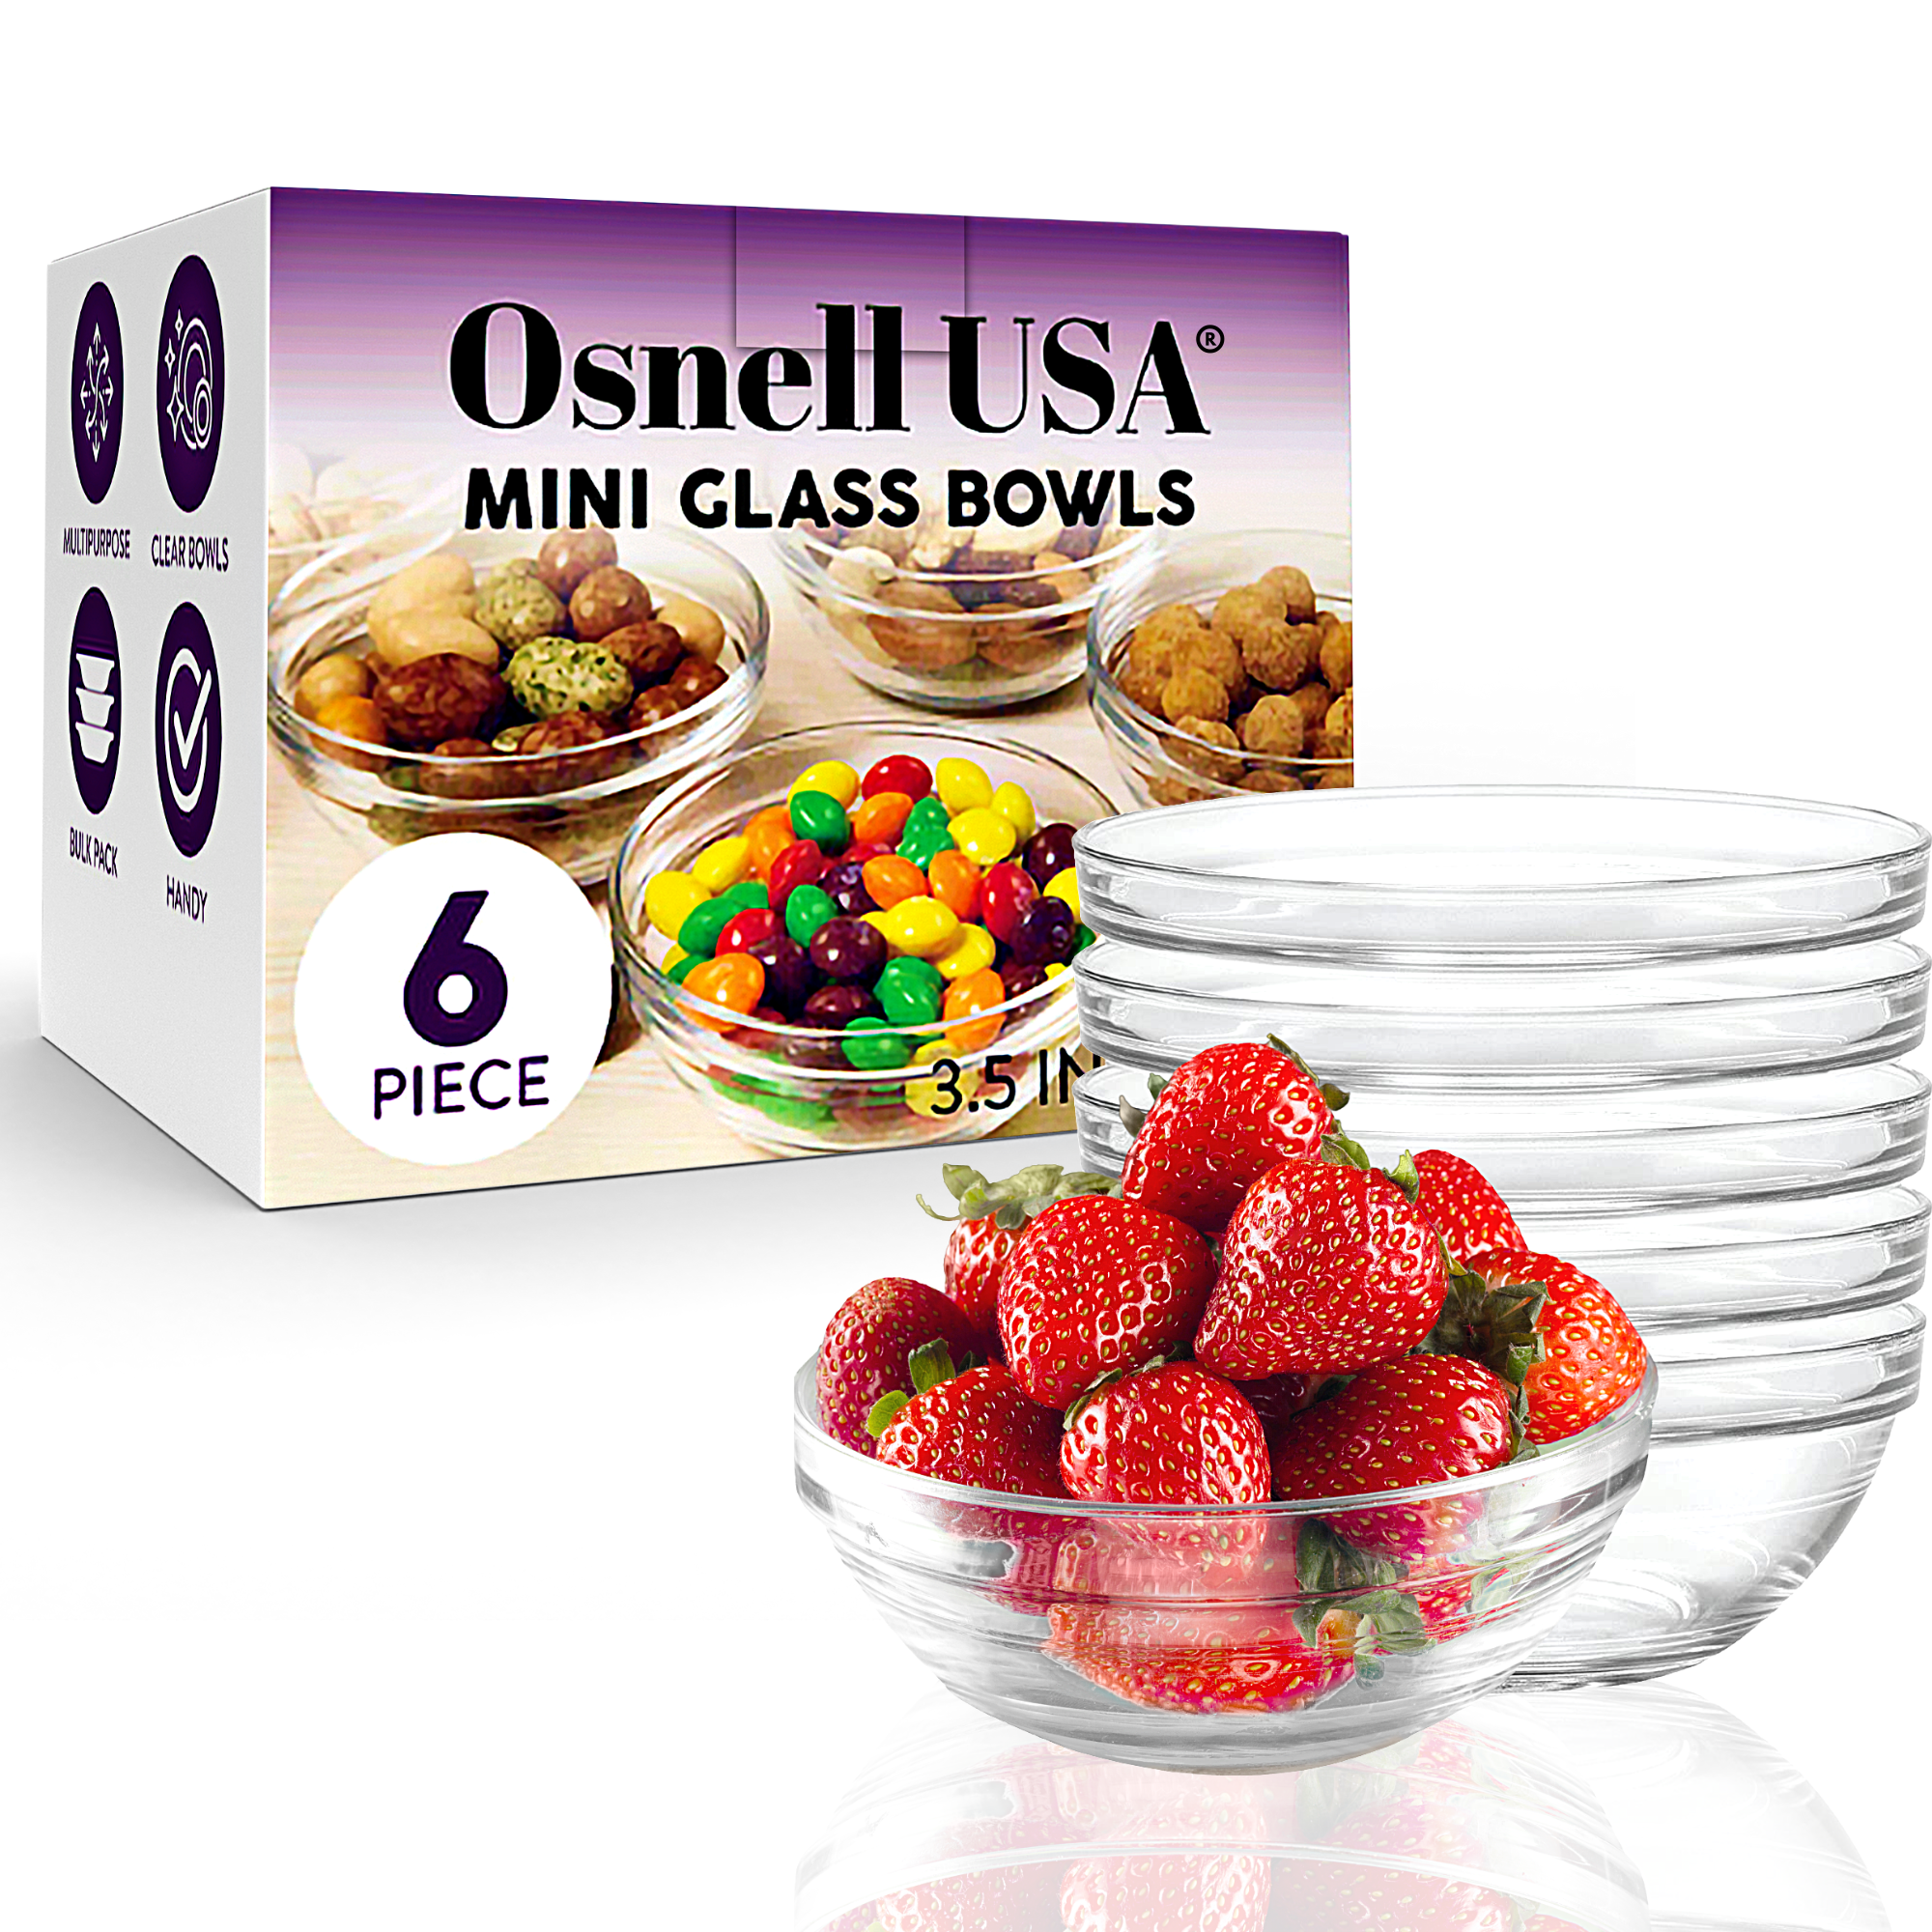 SZUAH 3.5 inch Small Glass Bowls 12 Pack Prep Bowls Serving Bowls 4.5 oz Microwavable Stackable Clear Glass Bowls for Kitchen, Dessert, Dips, Nut